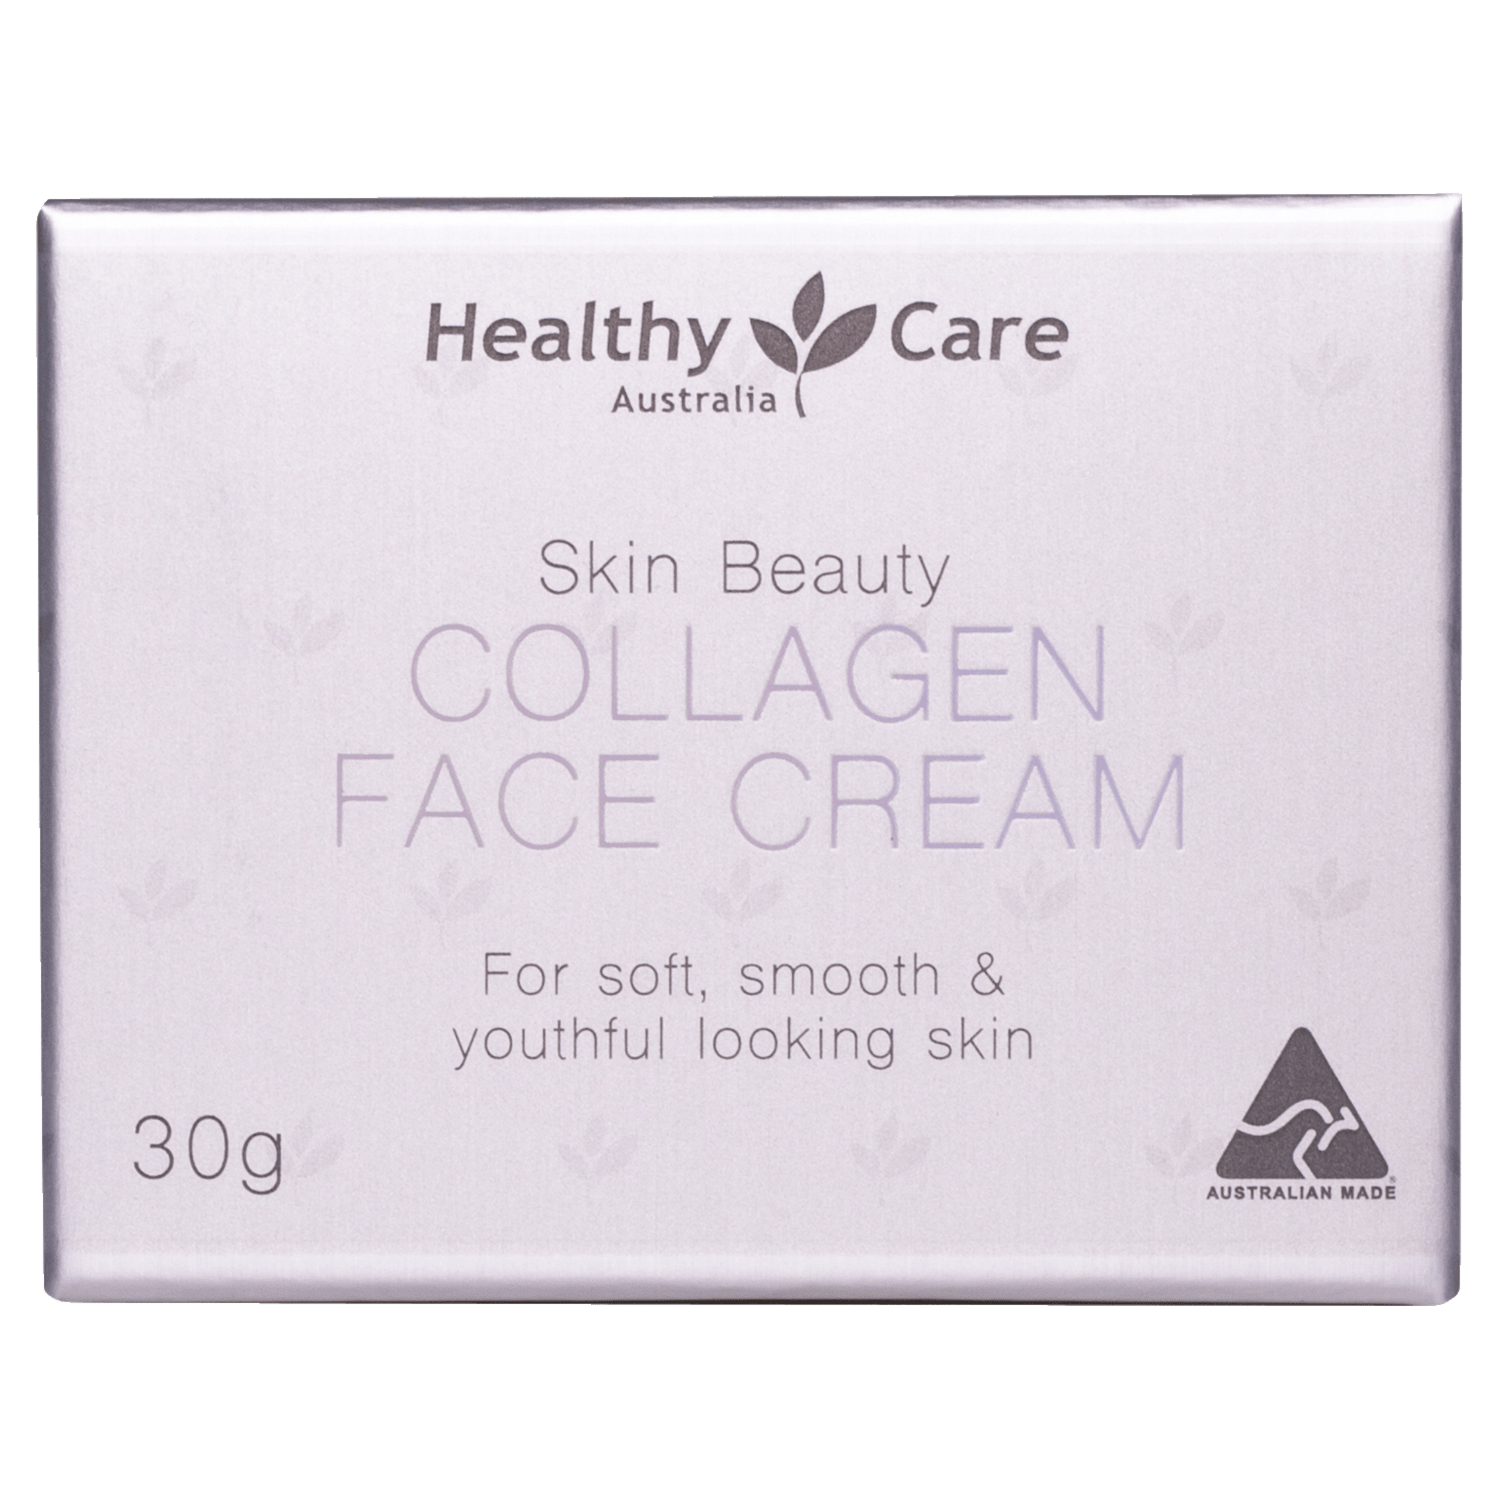 Collagen Face Cream 30g front of box packaging-Lotion & Moisturizer-Healthy Care Australia